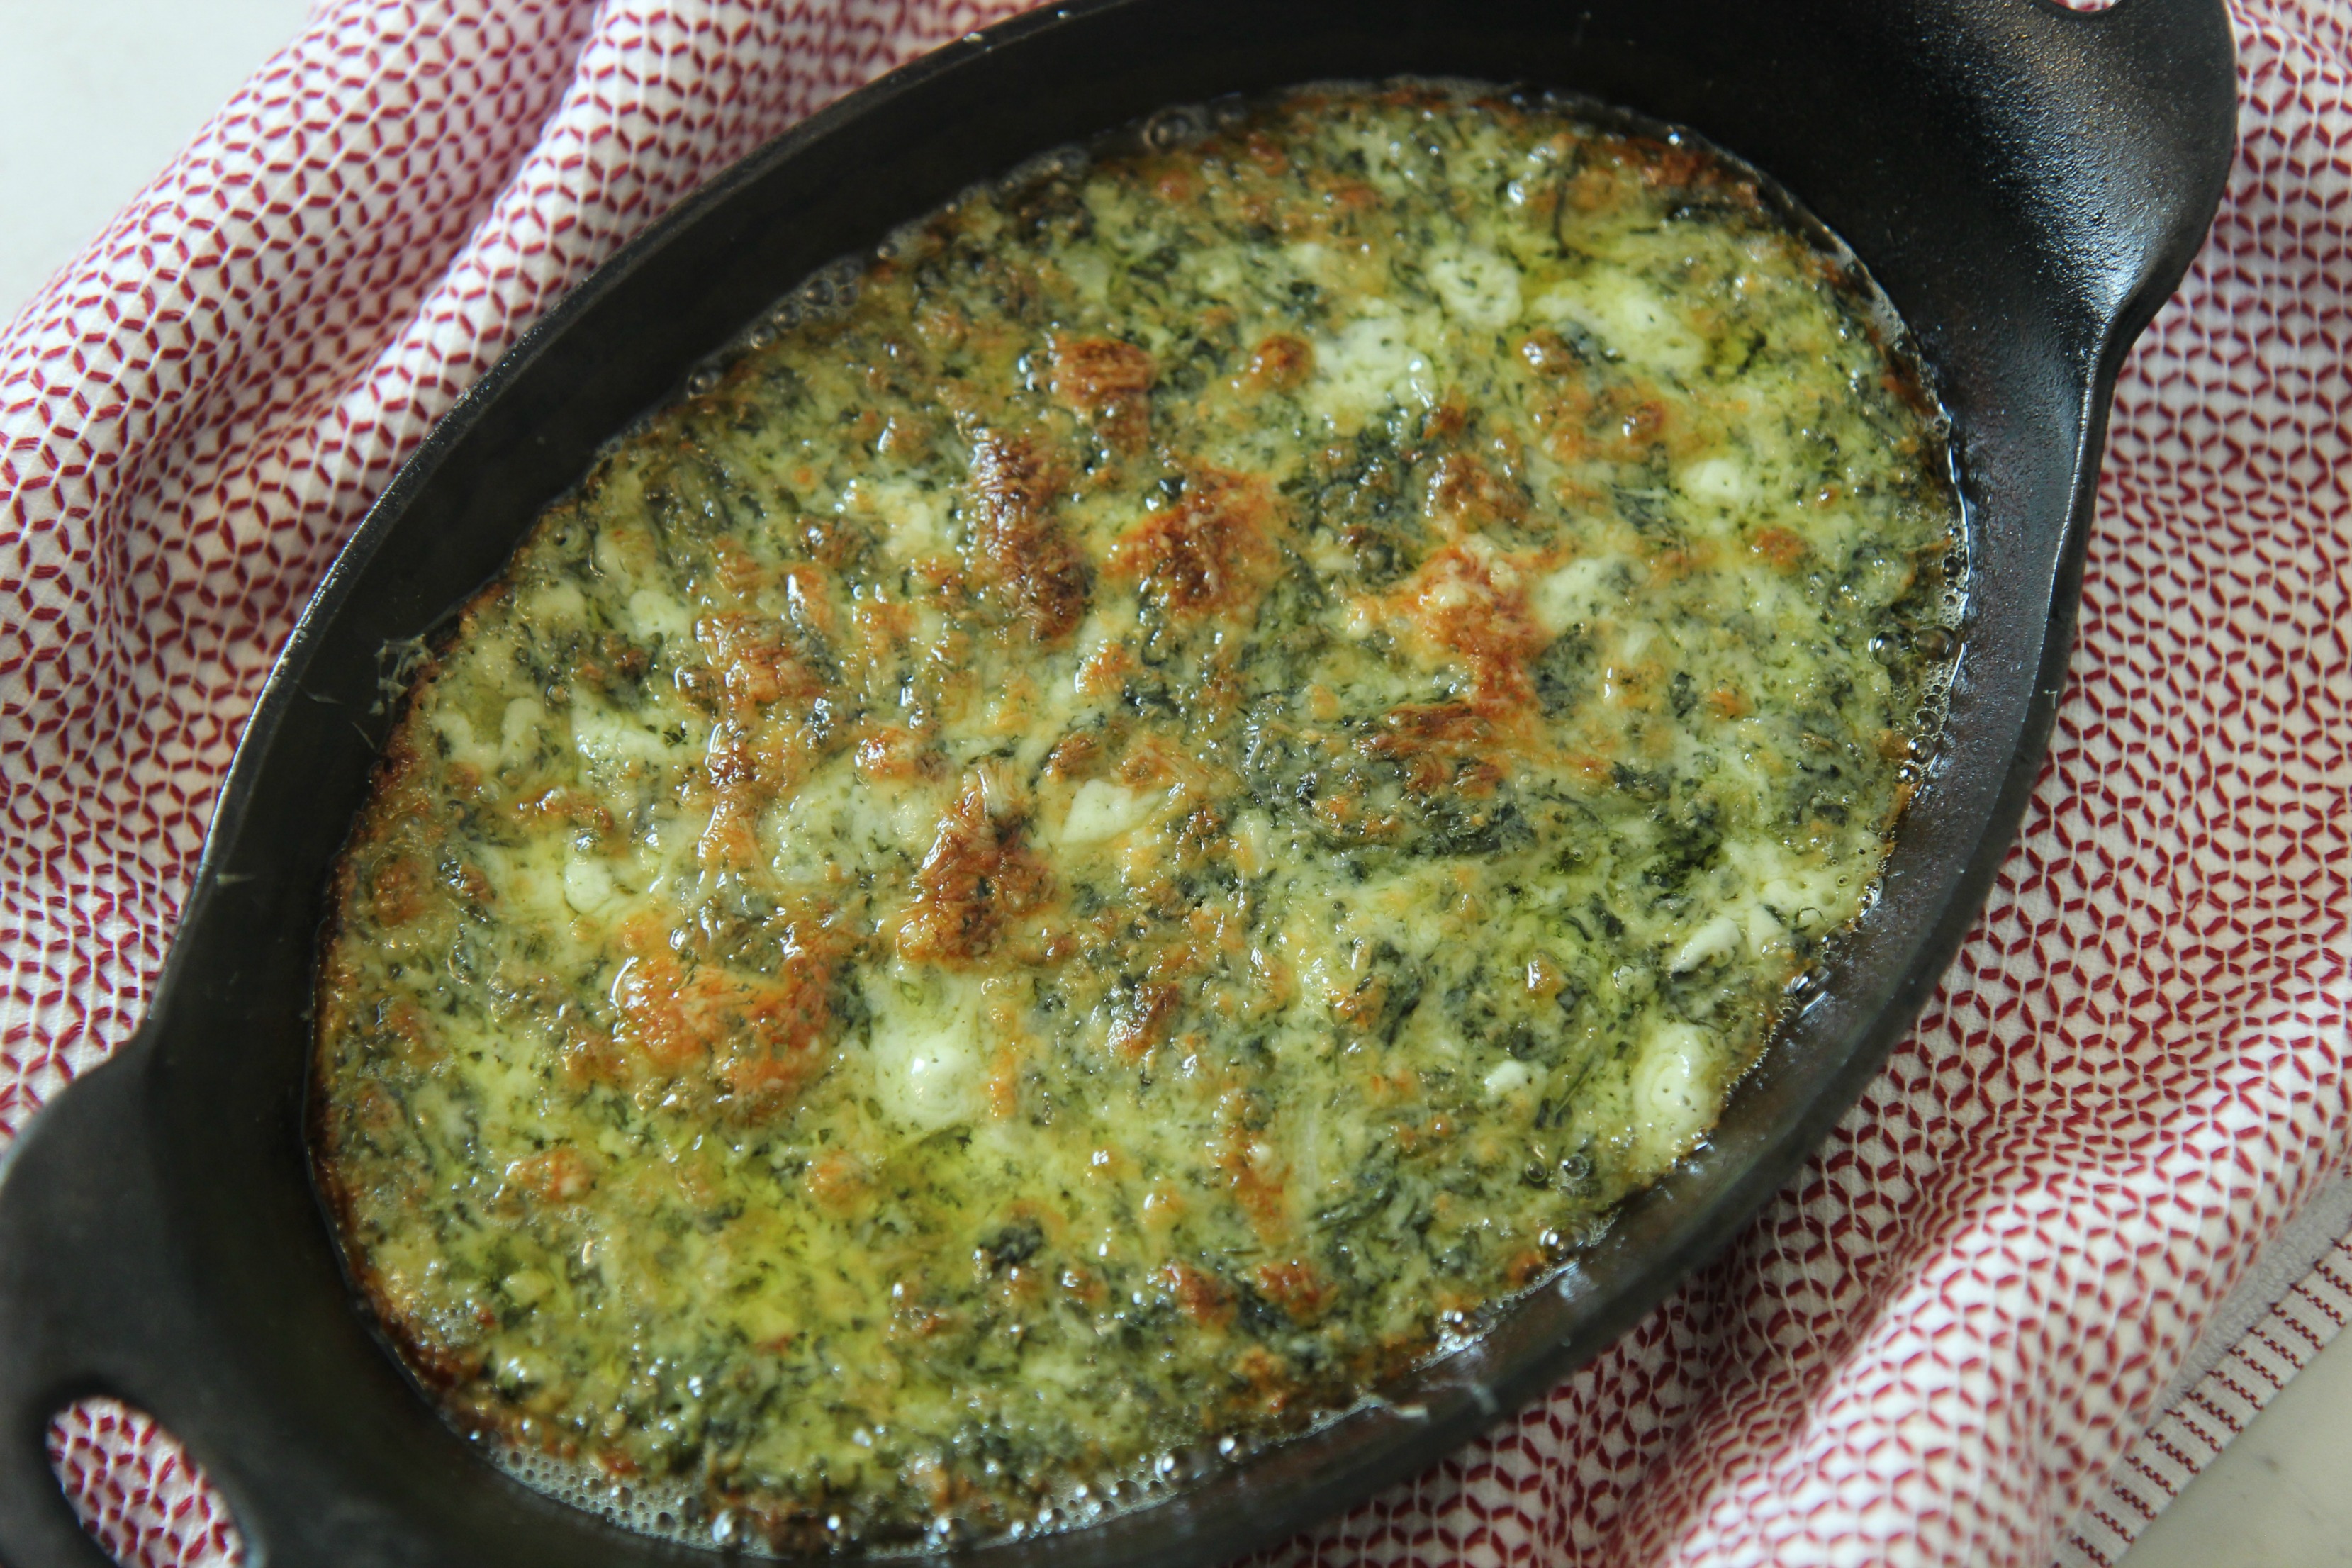 This spinach dip has a delicious cheesy baked crust that's perfect for dipping.